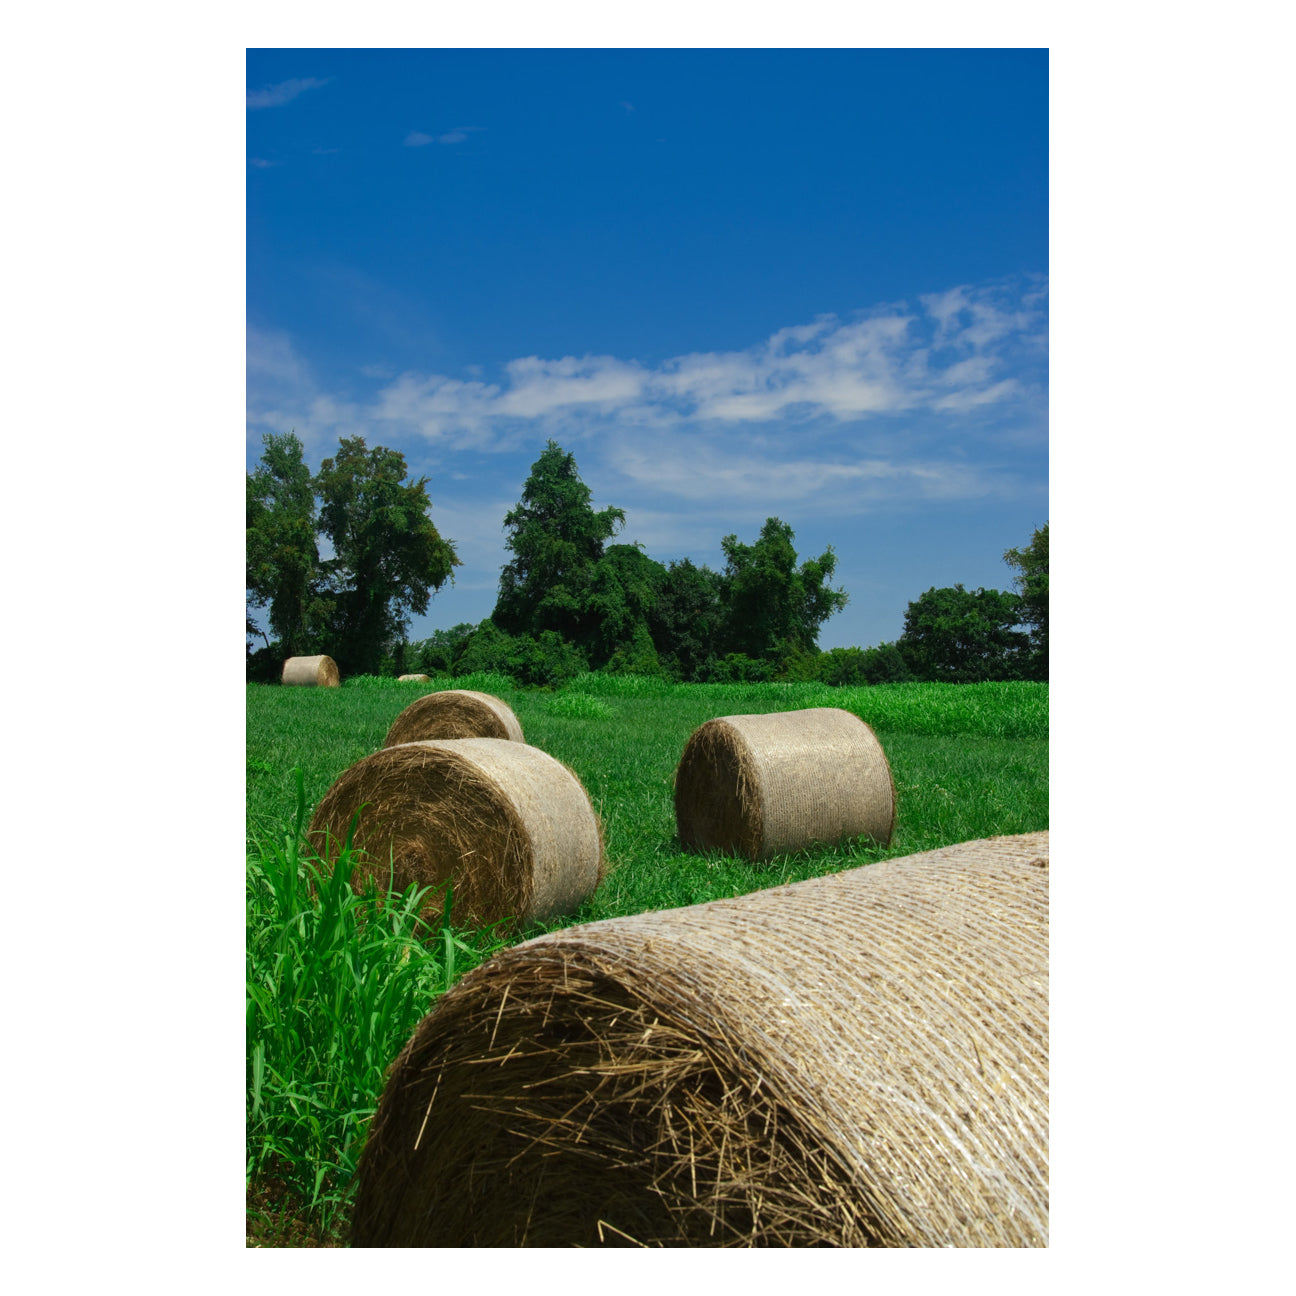 Hay Whatcha Doin in the Field Landscape Photo Fine Art Canvas Wall Art Prints  - PIPAFINEART